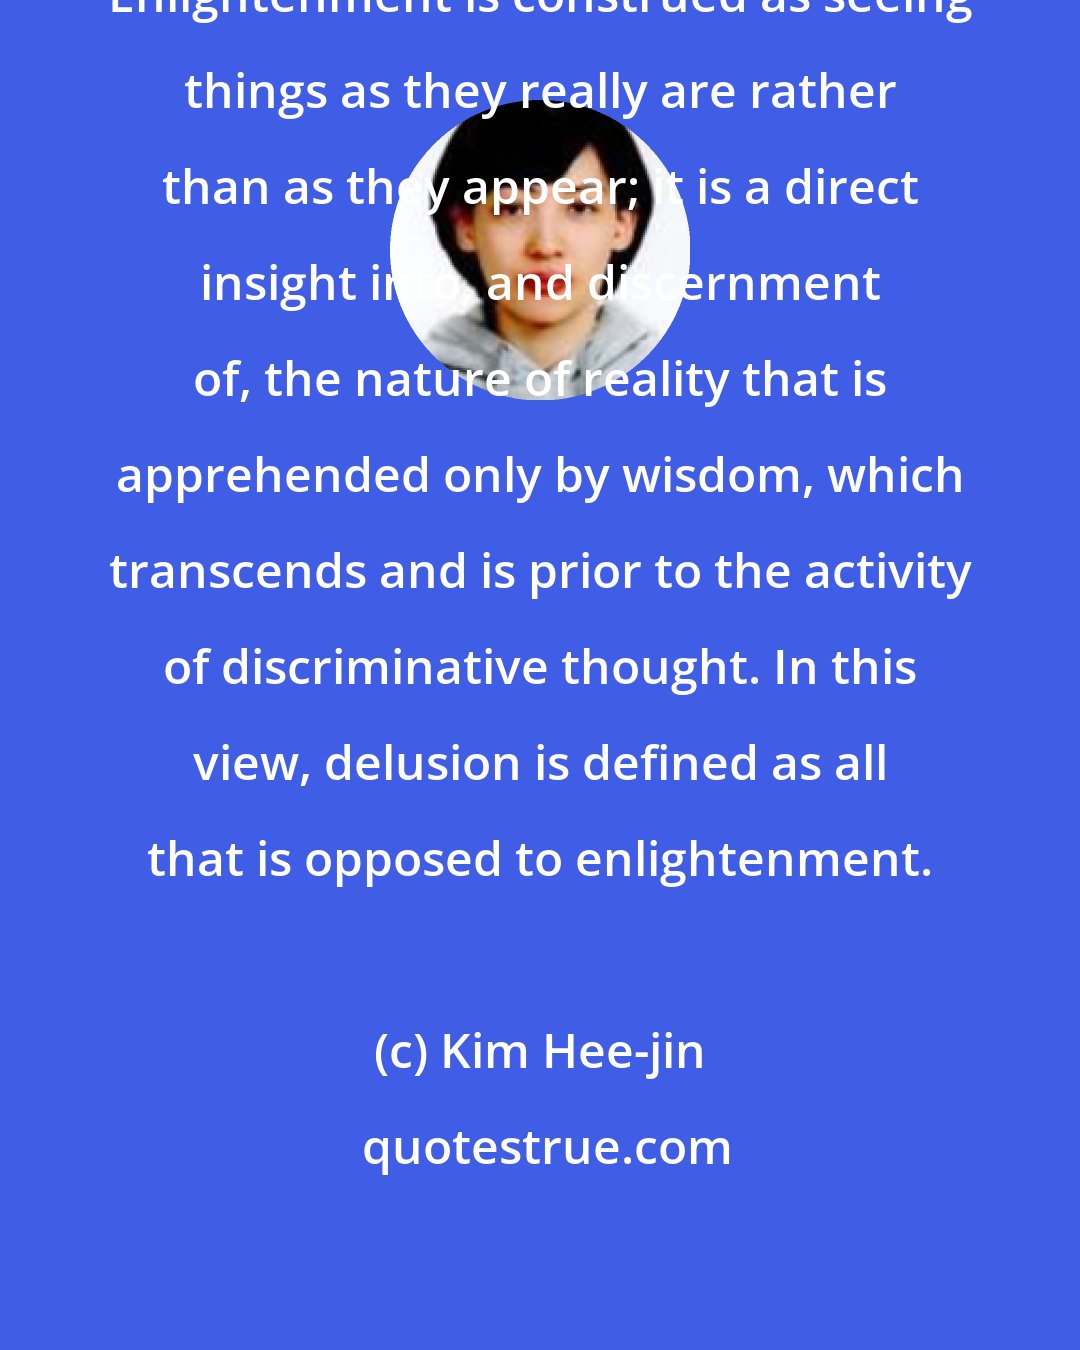 Kim Hee-jin: Enlightenment is construed as seeing things as they really are rather than as they appear; it is a direct insight into, and discernment of, the nature of reality that is apprehended only by wisdom, which transcends and is prior to the activity of discriminative thought. In this view, delusion is defined as all that is opposed to enlightenment.